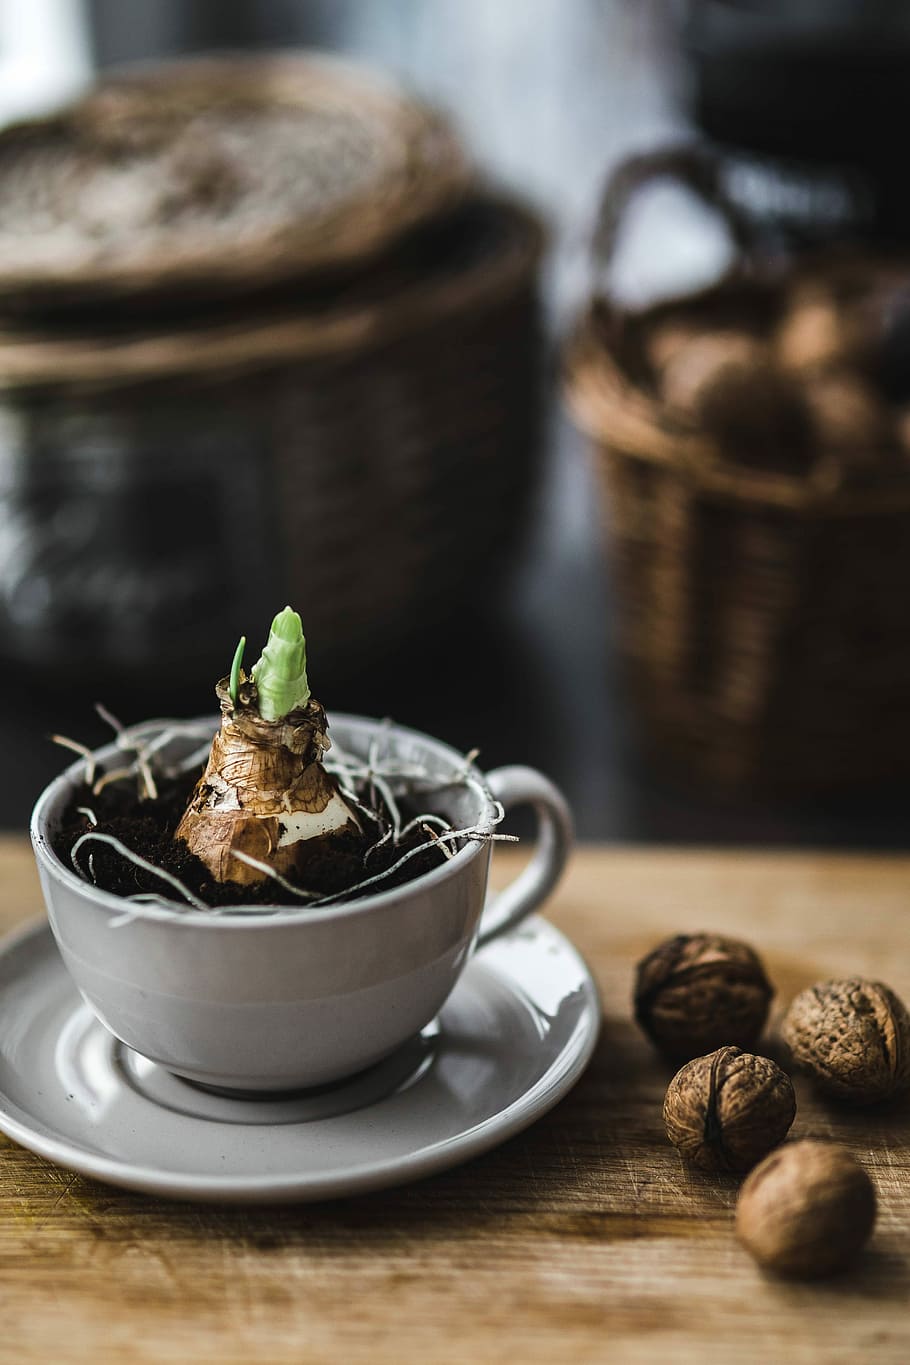 Little seedling in a cut with walnuts and golden pins, cup, plant